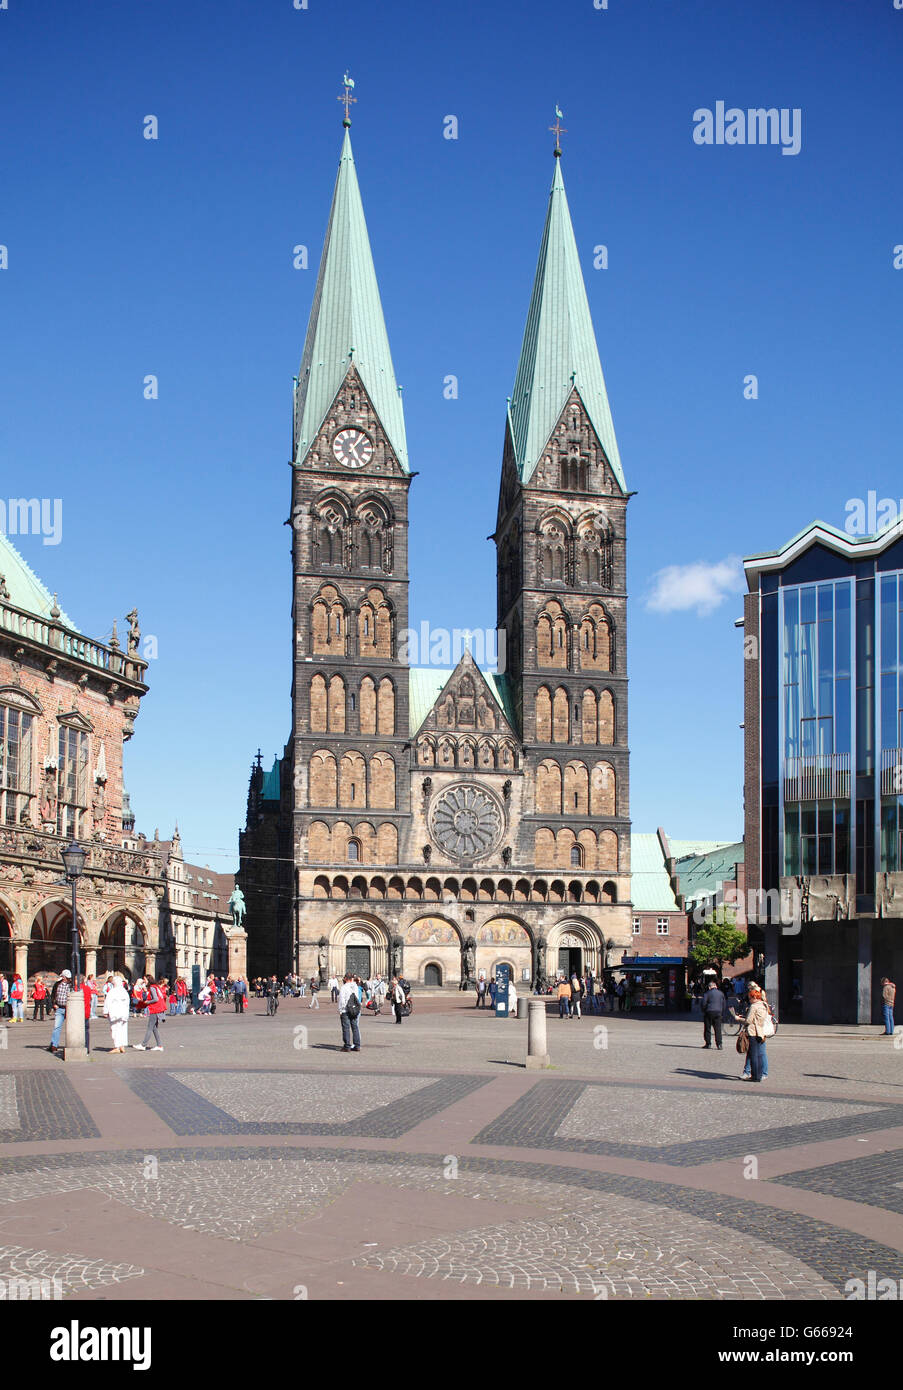 Cathedral and market place, Bremen, Germany Stock Photo